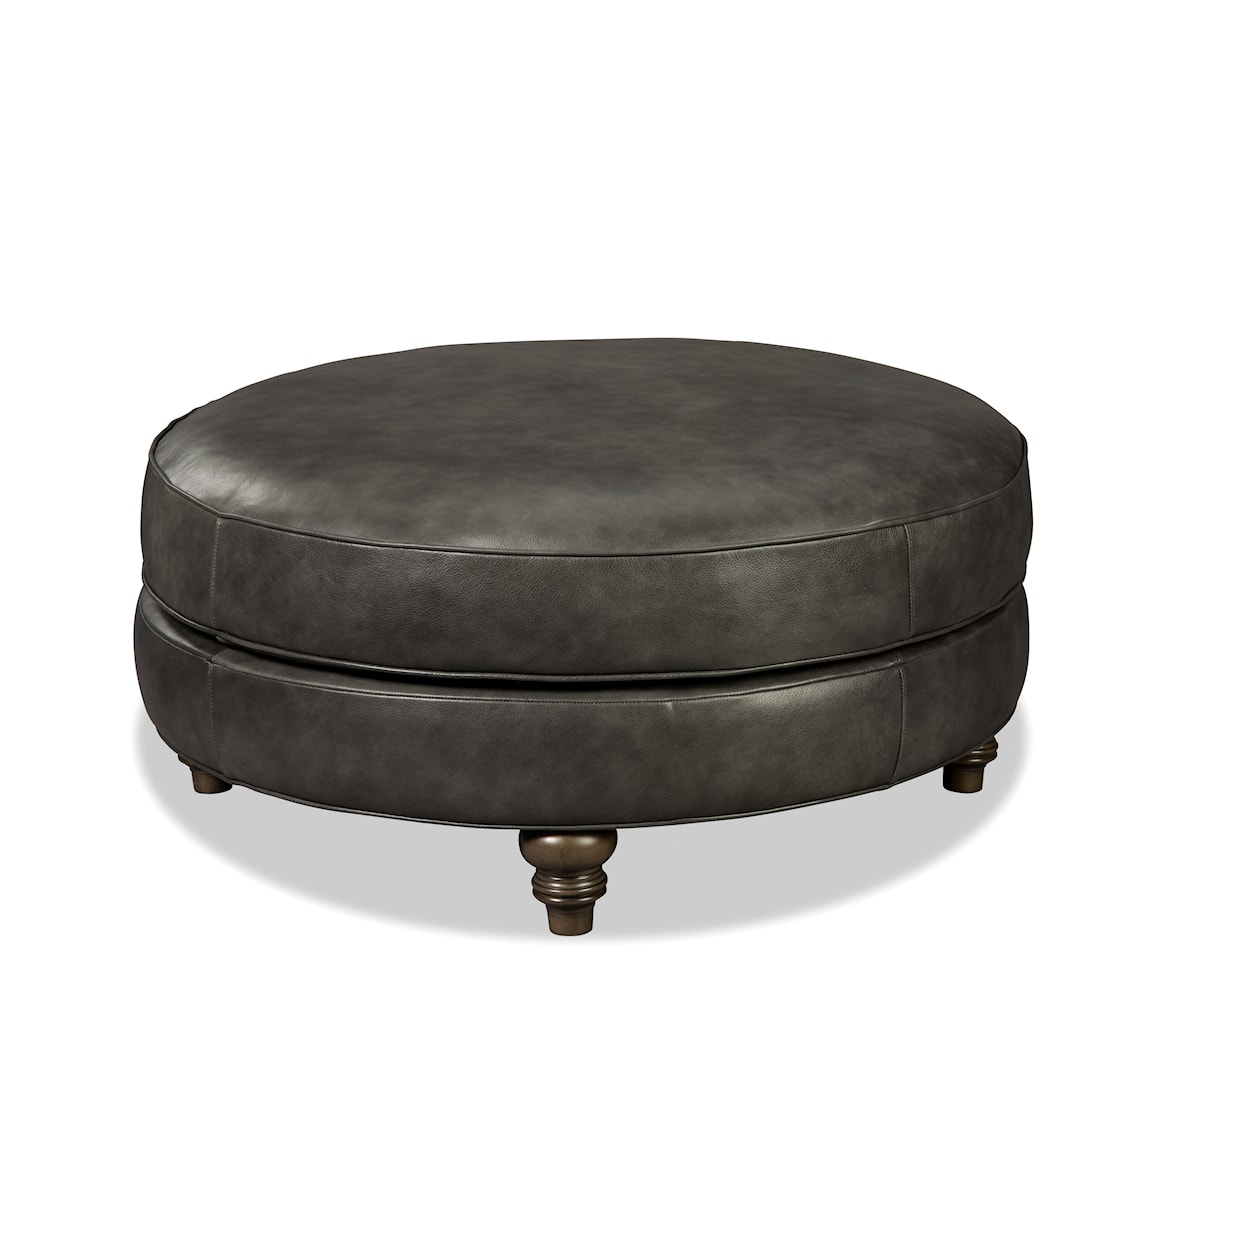 Hickory Craft L011500 Round Leather Cocktail Ottoman